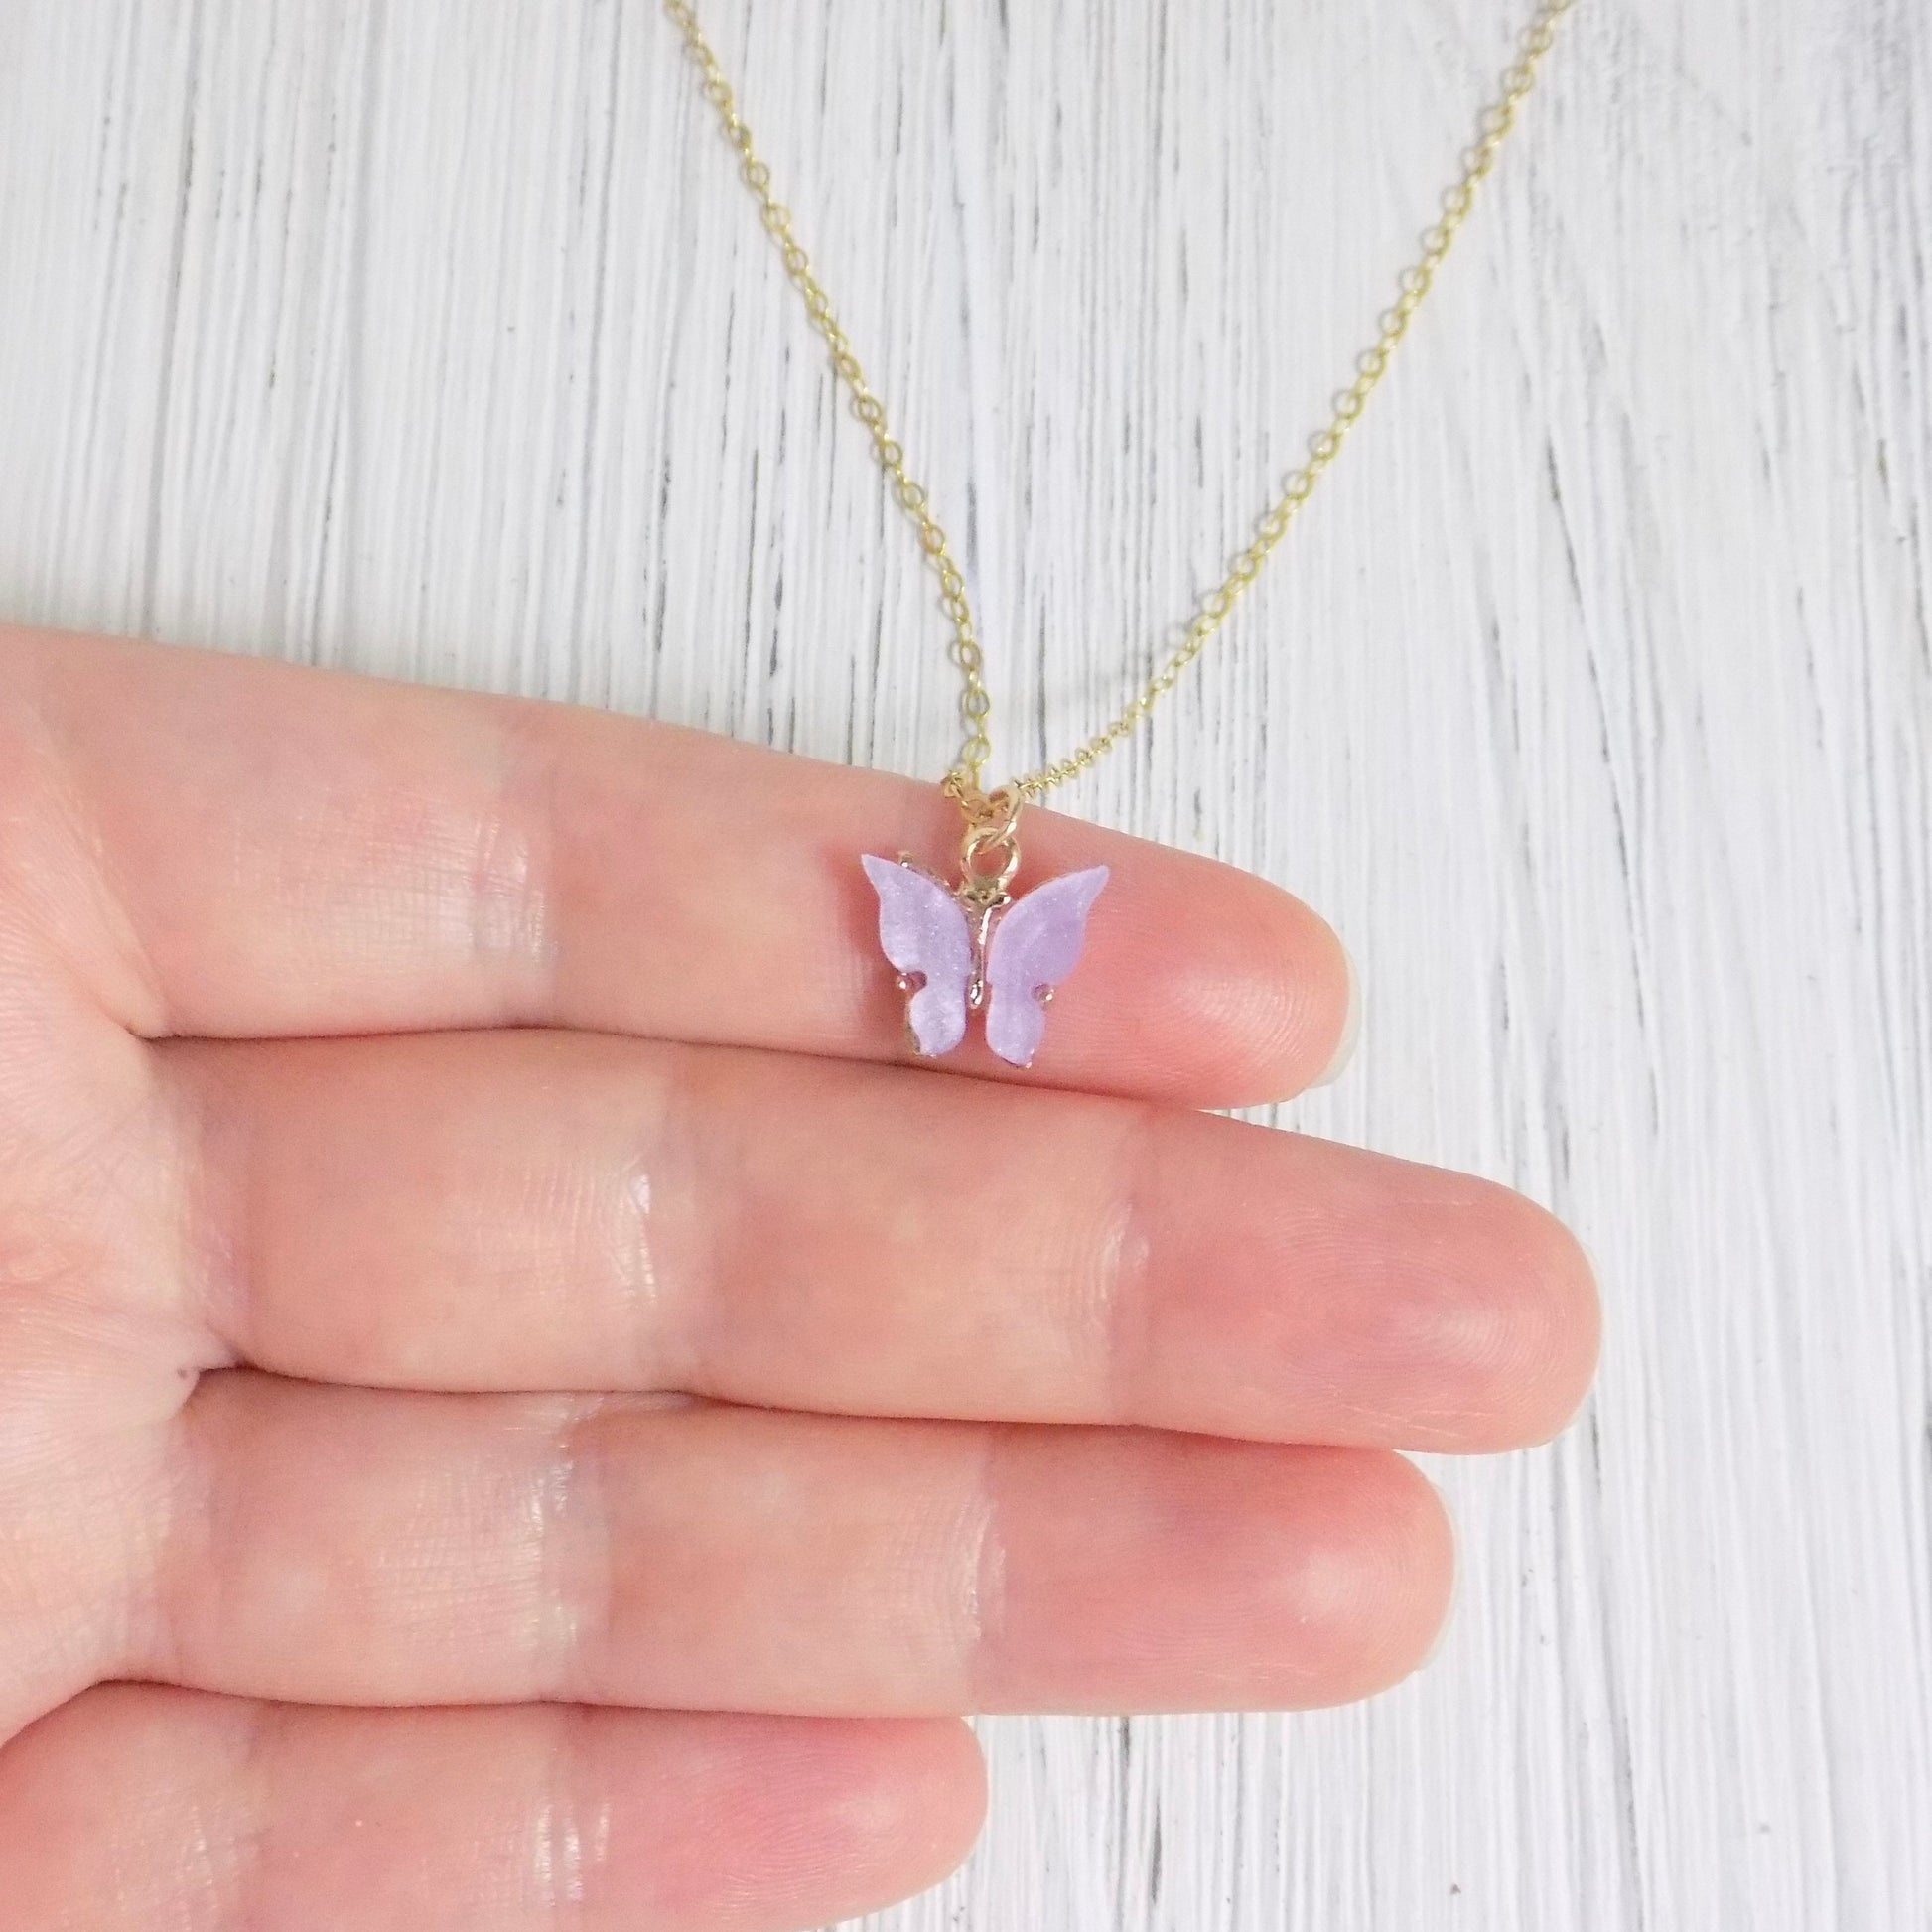 Minimalist Butterfly Charm Necklace on 14K Gold Filled Chain, Unique Valentines Day Gift, M4-85